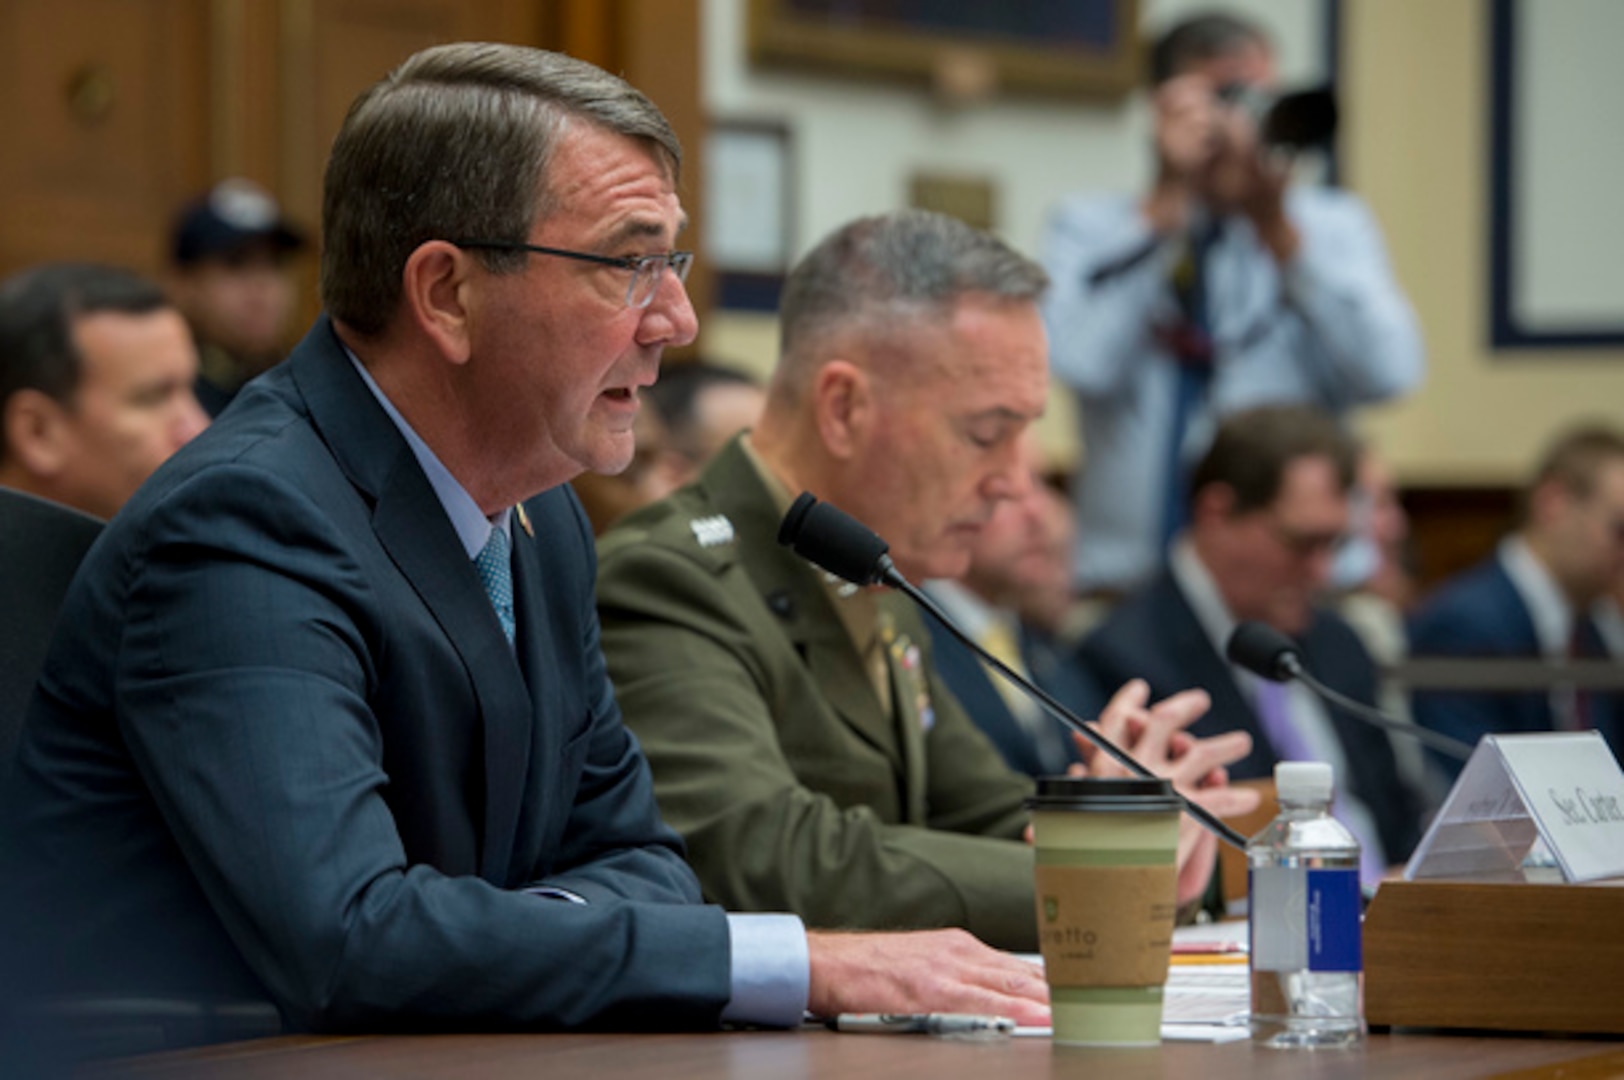 Defense Secretary Ash Carter, foreground, and Marine Corps Gen. Joseph F. Dunford Jr., chairman of the Joint Chiefs of Staff, testify before the House Armed Services Committee about U.S. strategy for Syria and Iraq in Washington, D.C., Dec. 1, 2015. (DoD photo by Air Force Senior Master Sgt. Adrian Cadiz)